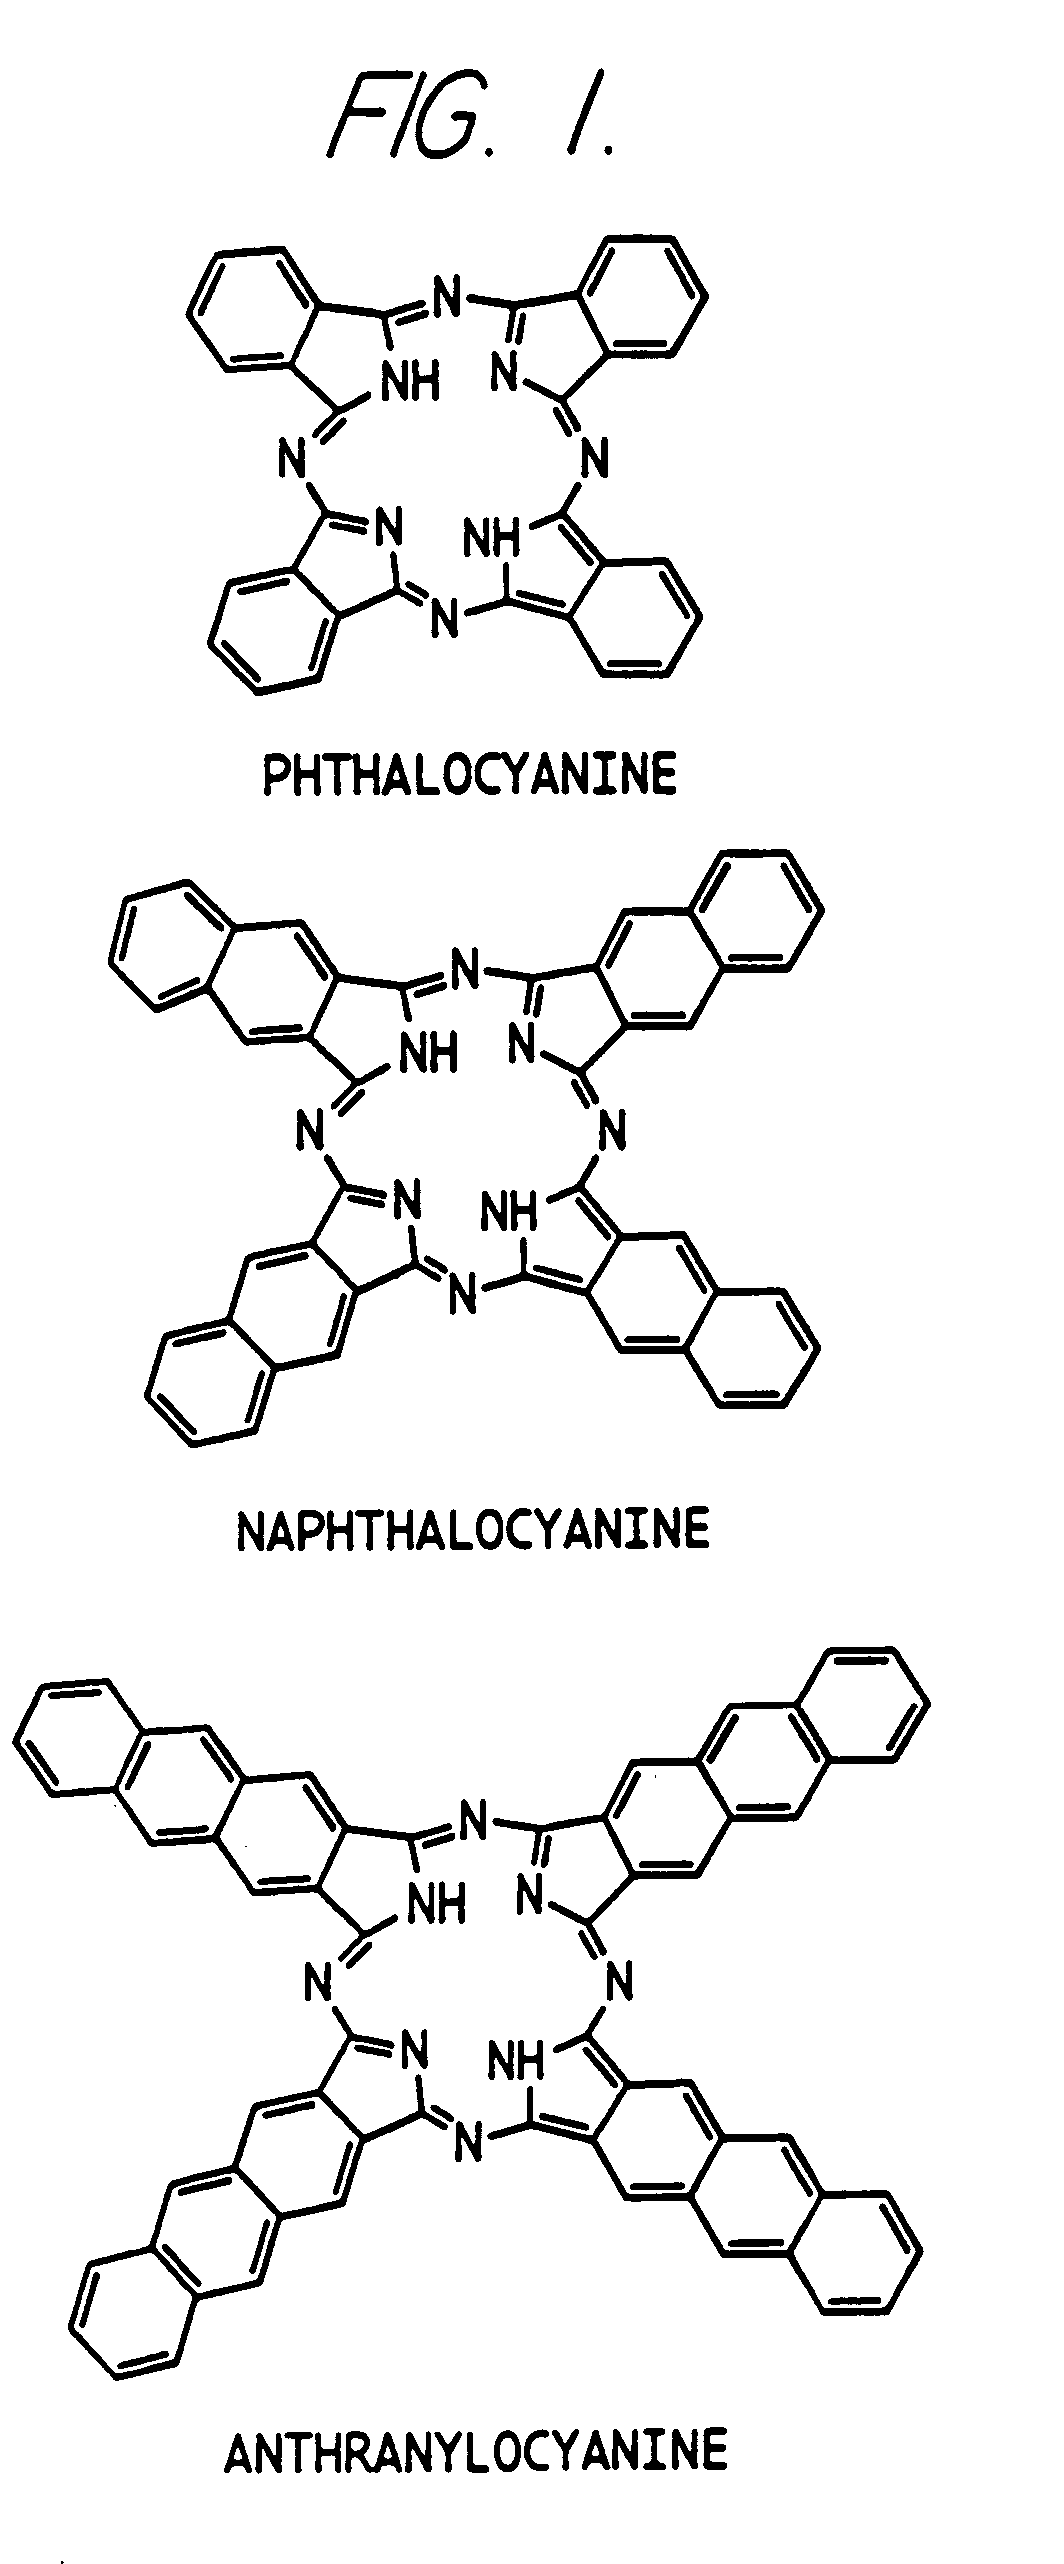 Hybrid phthalocyanine derivatives and their uses